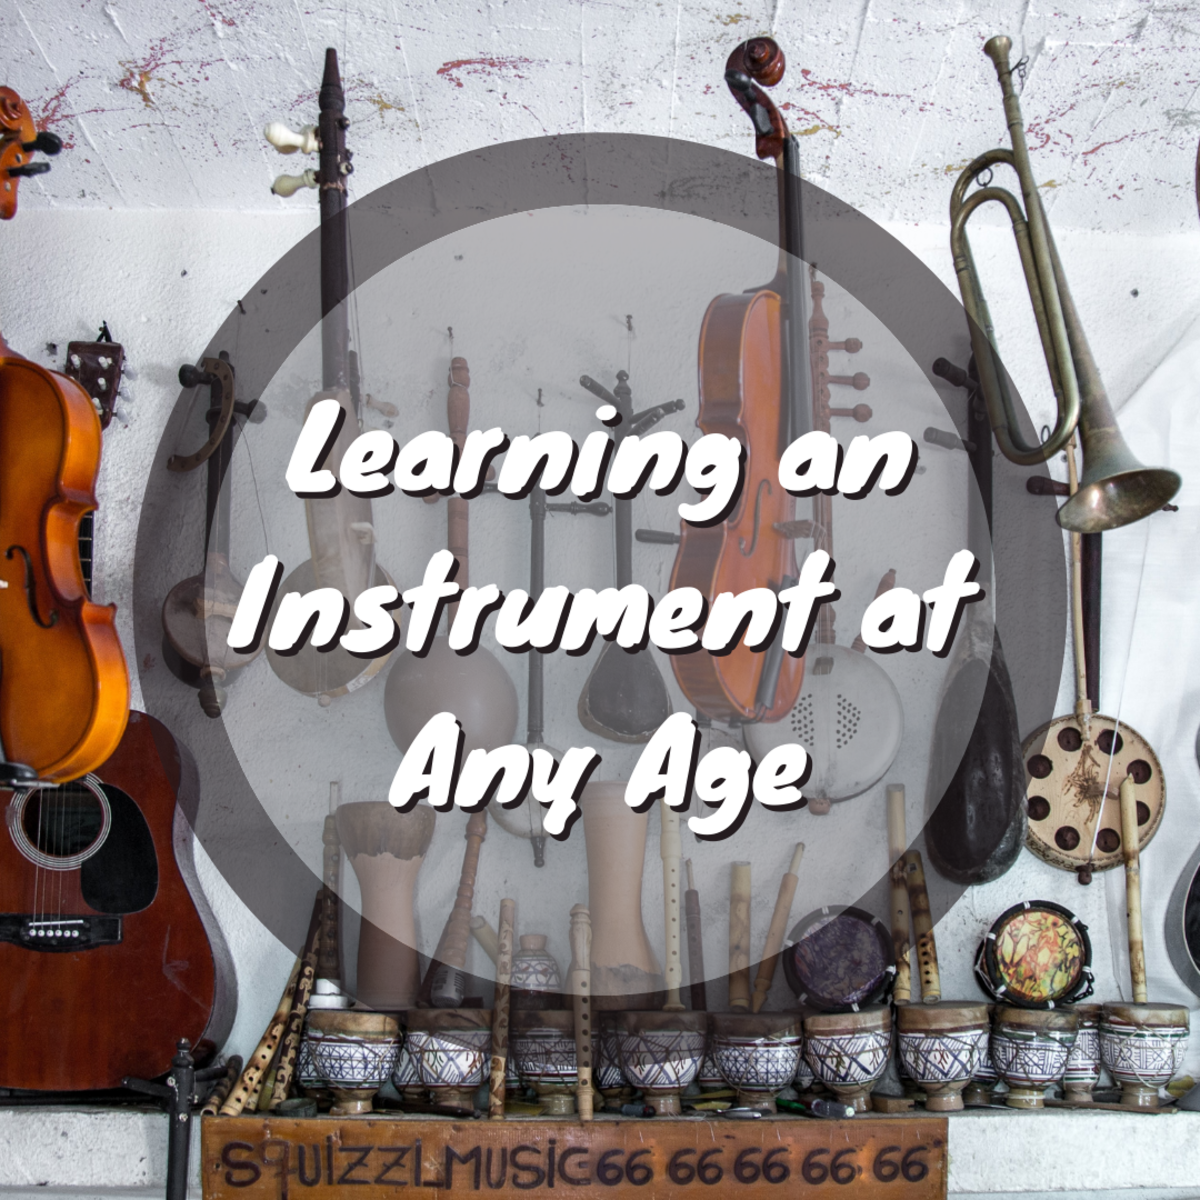 Learning the Violin (or Any Instrument) as a Child, Teen, or Adult